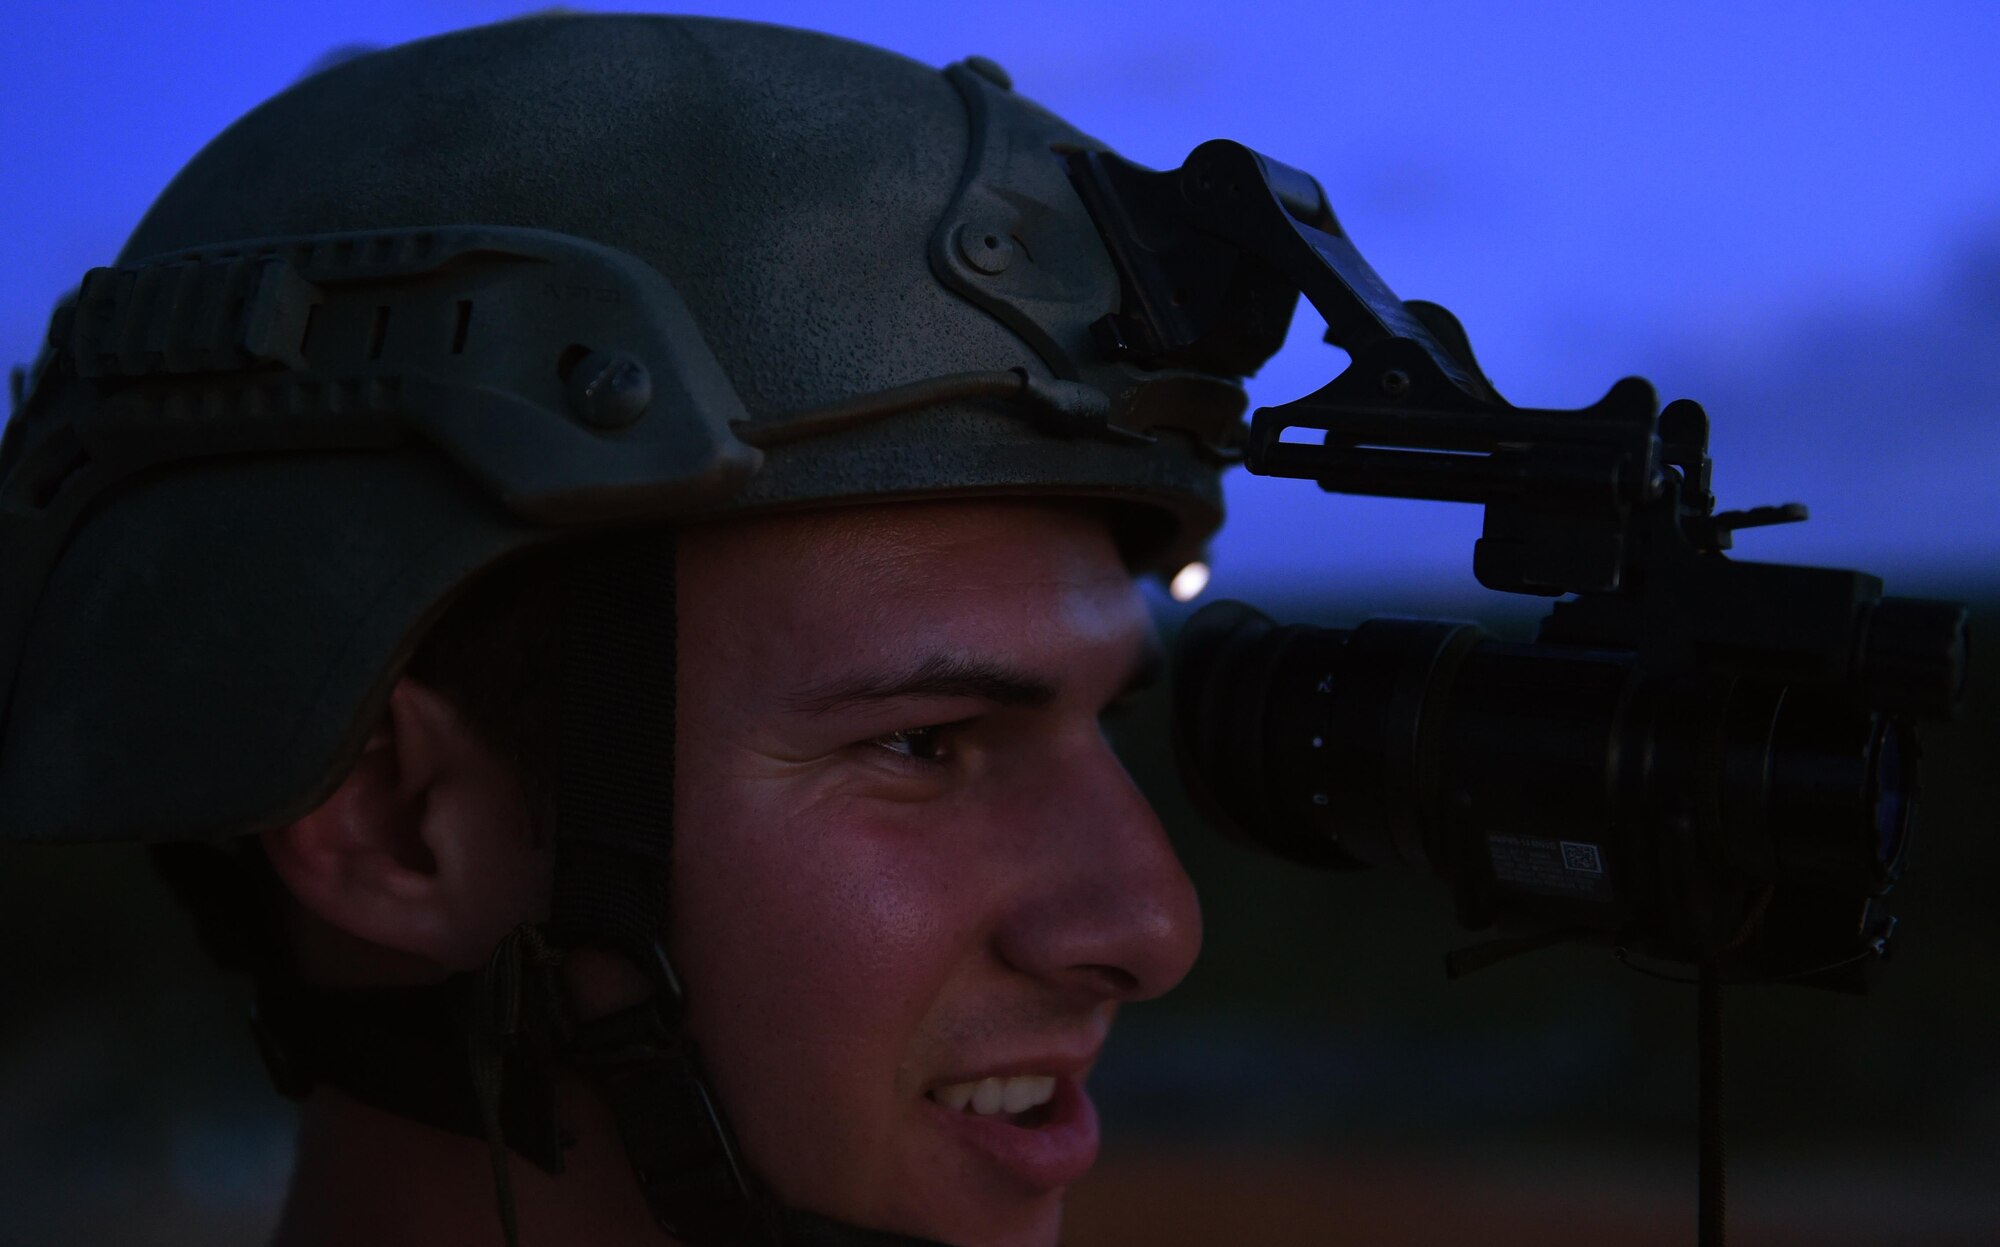 Senior Airman Caleb Brooks, 1st Special Operations Security Forces Squadron deployed aircraft ground response element, watches 105mm howitzer rounds hit a target during live-fire training, June 16, 2015, at Eglin Range, Fla. Aircrew members communicated closely with ground-range operators to ensure the gunship's rounds hit simulated enemy targets. (U.S. Air Force photo by Airman 1st Class Ryan Conroy/Released)